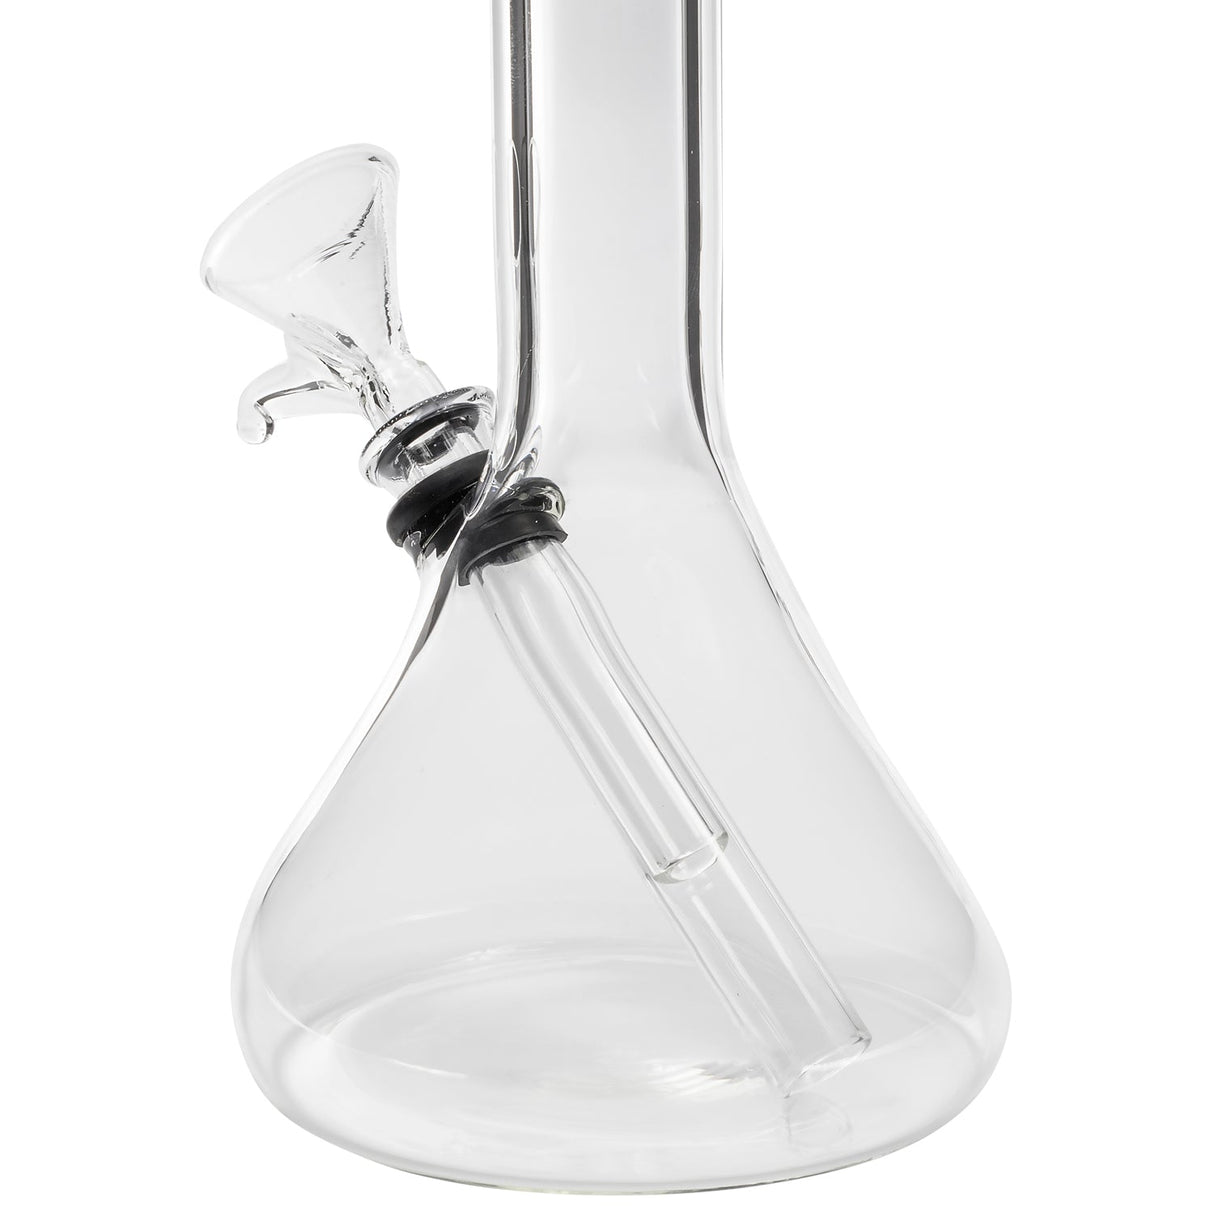 Close-up of LA Pipes "The OG" Beaker Bong with clear borosilicate glass and grommet joint